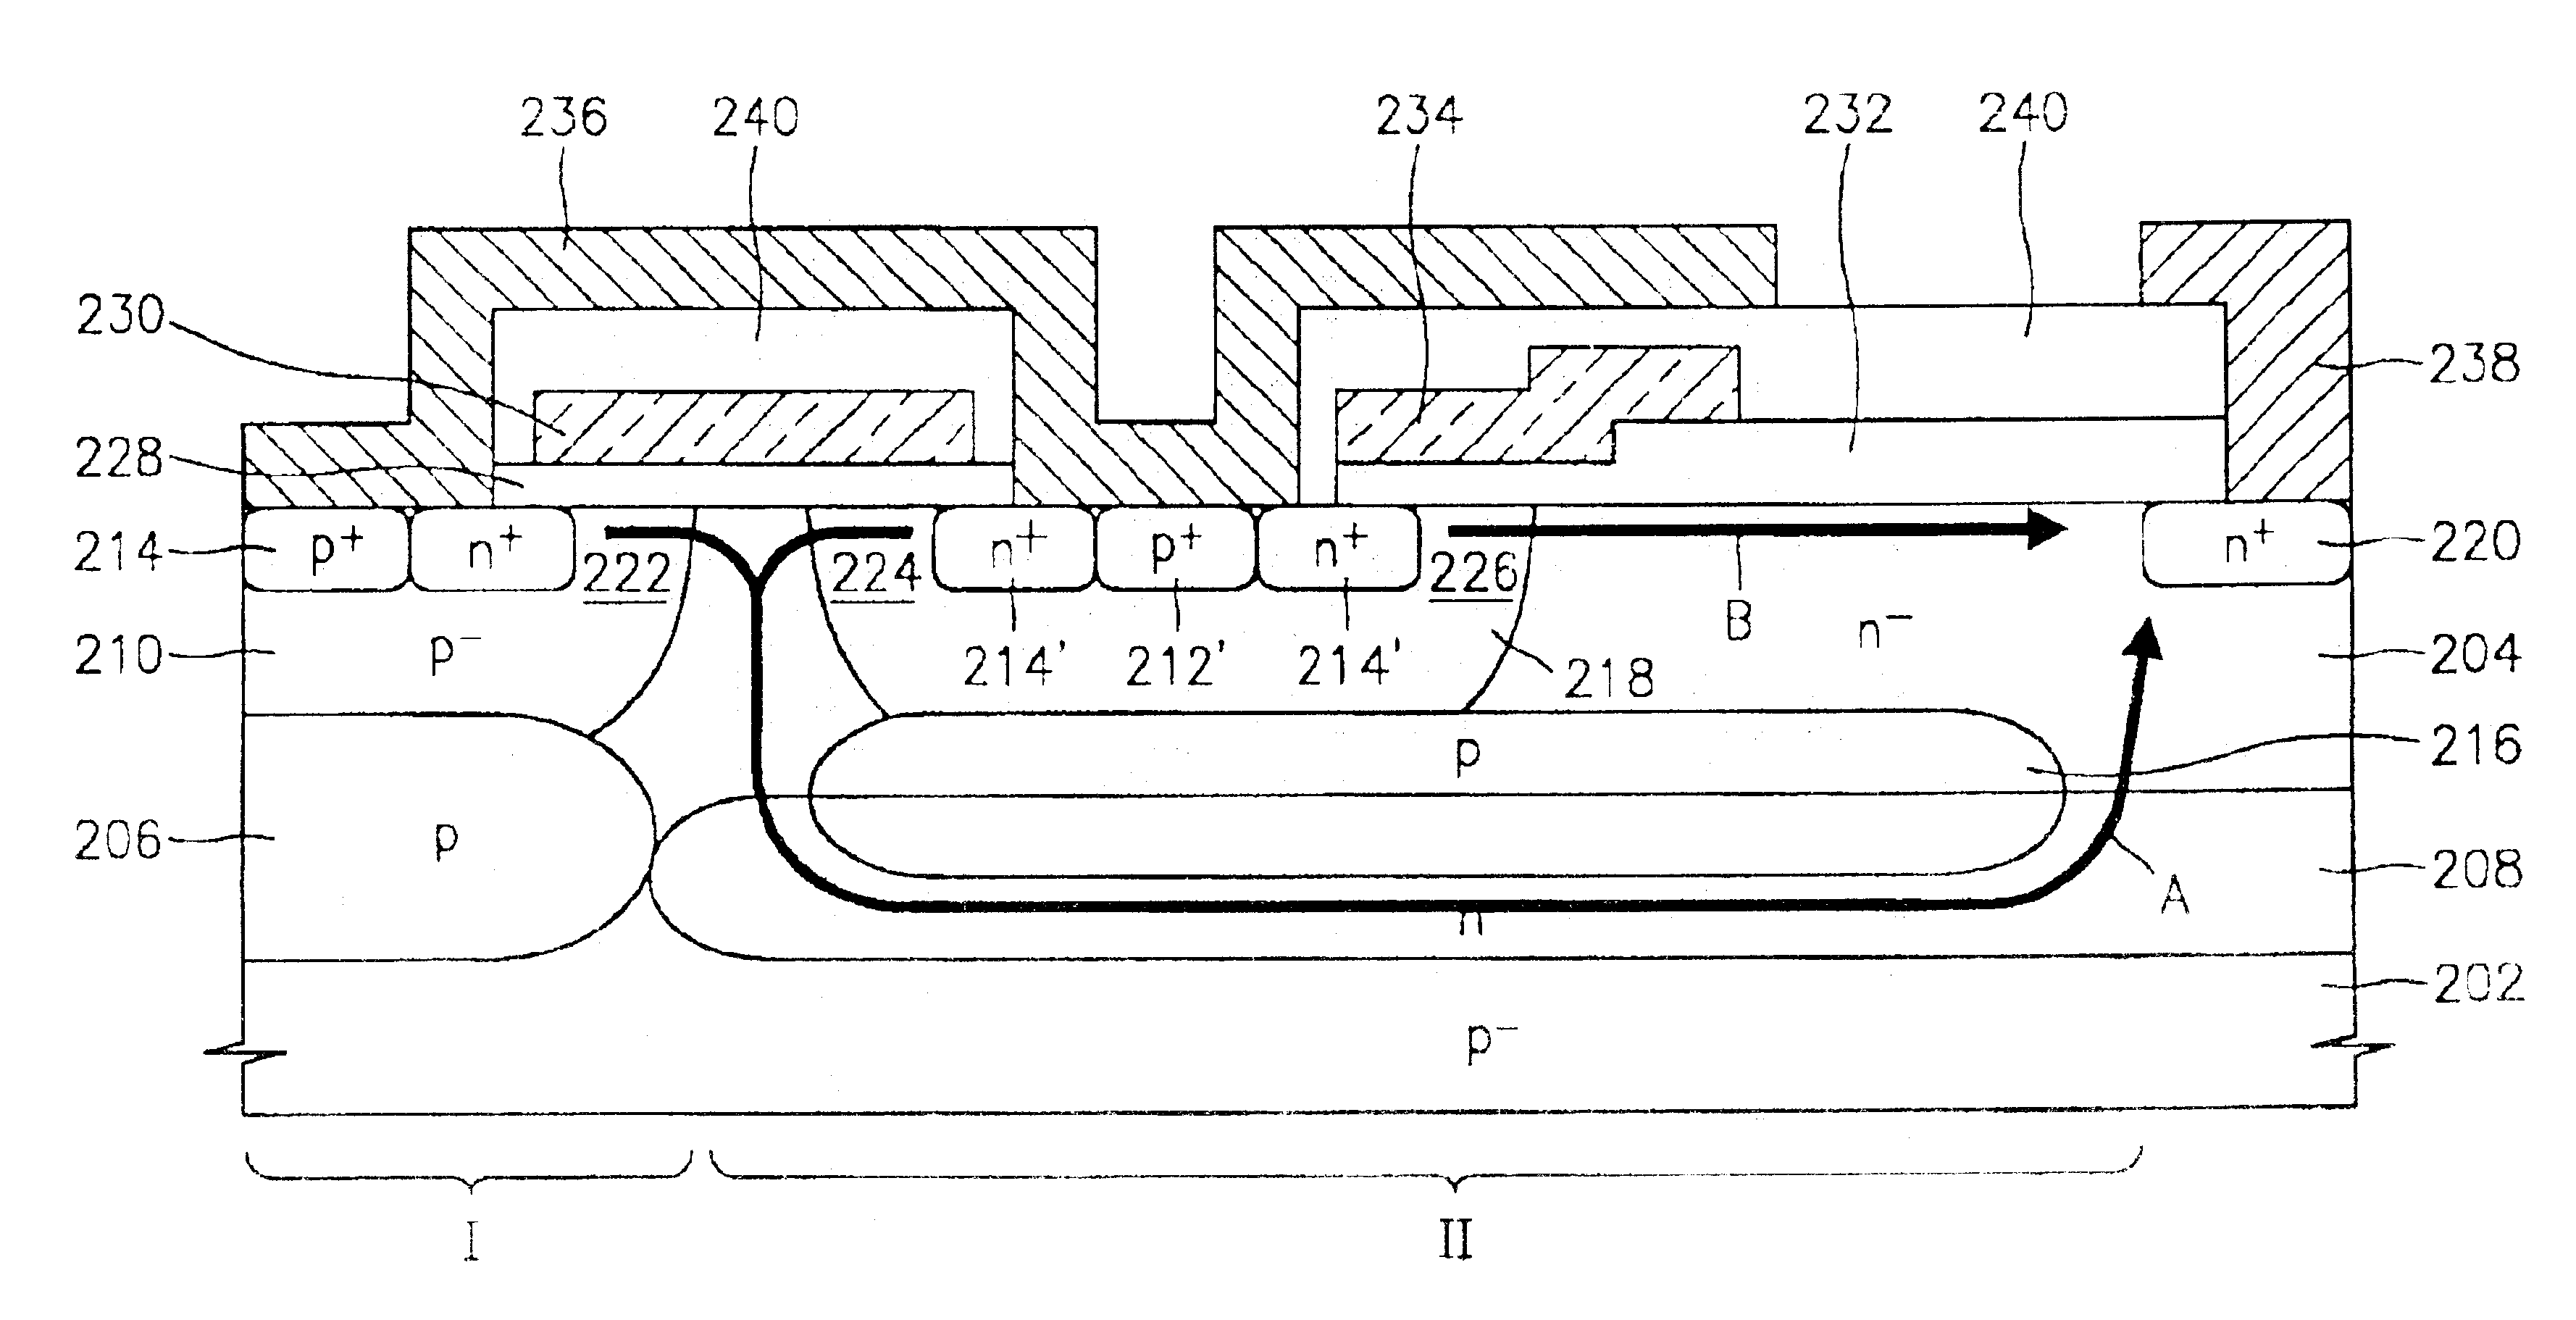 Lateral double-diffused MOS transistor having multiple current paths for high breakdown voltage and low on-resistance